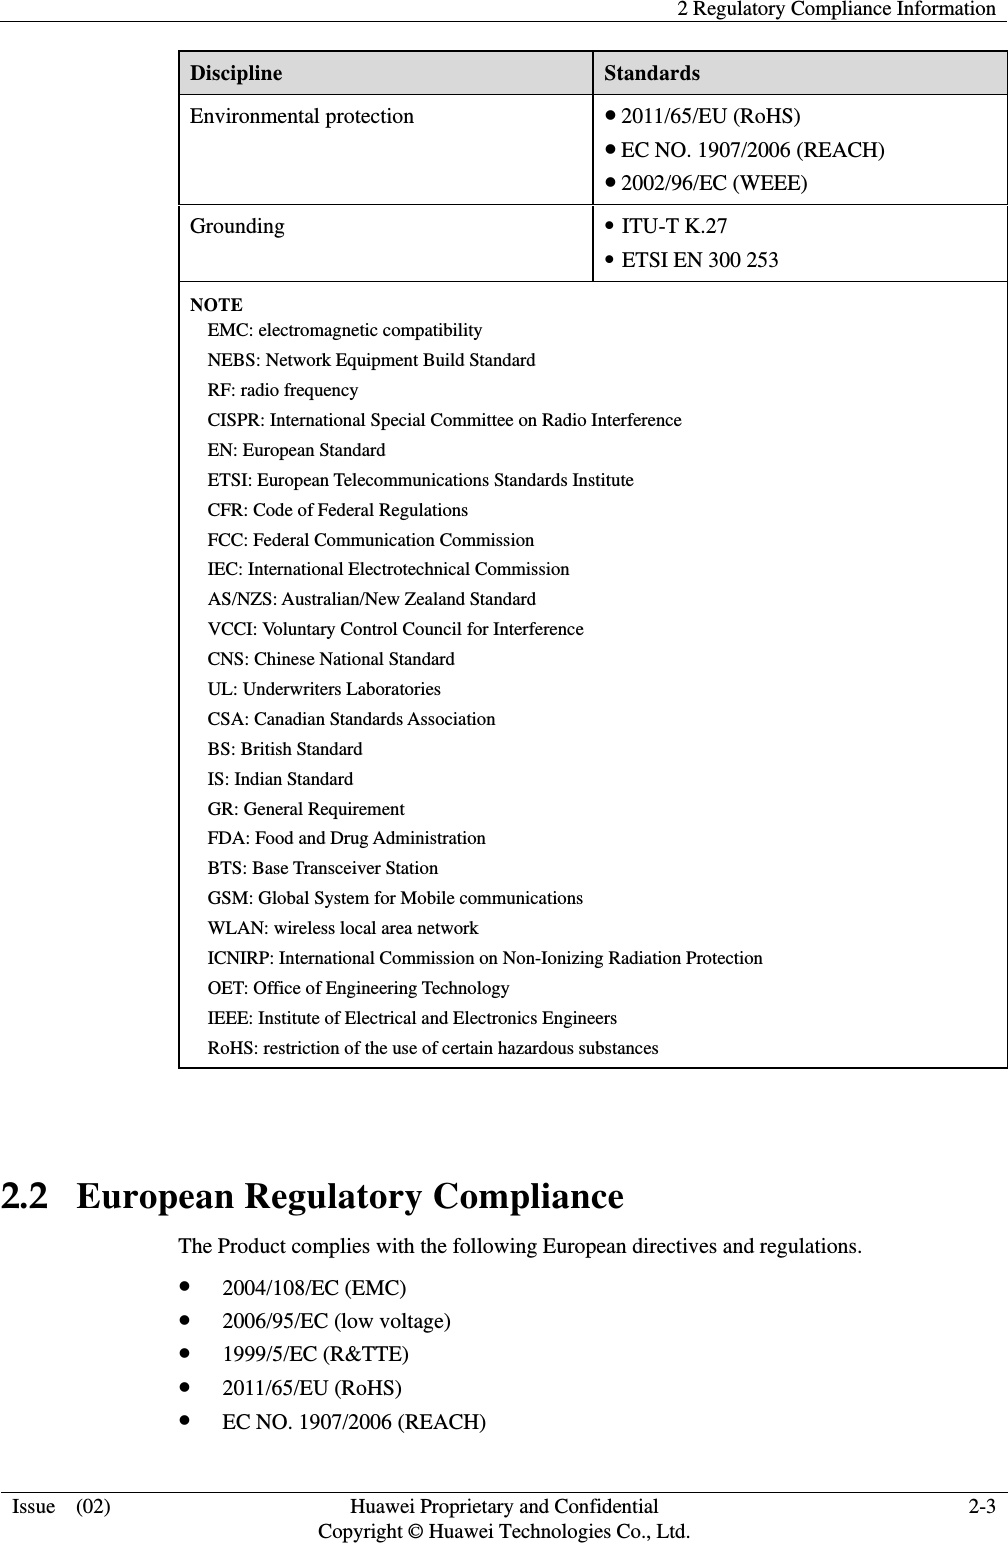    2 Regulatory Compliance Information  Issue  (02)  Huawei Proprietary and Confidential     Copyright © Huawei Technologies Co., Ltd. 2-3 Discipline  Standards Environmental protection  z 2011/65/EU (RoHS) z EC NO. 1907/2006 (REACH) z 2002/96/EC (WEEE) Grounding  z ITU-T K.27 z ETSI EN 300 253 NOTE EMC: electromagnetic compatibility NEBS: Network Equipment Build Standard RF: radio frequency CISPR: International Special Committee on Radio Interference EN: European Standard ETSI: European Telecommunications Standards Institute CFR: Code of Federal Regulations FCC: Federal Communication Commission IEC: International Electrotechnical Commission AS/NZS: Australian/New Zealand Standard VCCI: Voluntary Control Council for Interference CNS: Chinese National Standard UL: Underwriters Laboratories CSA: Canadian Standards Association BS: British Standard IS: Indian Standard GR: General Requirement FDA: Food and Drug Administration BTS: Base Transceiver Station GSM: Global System for Mobile communications WLAN: wireless local area network ICNIRP: International Commission on Non-Ionizing Radiation Protection OET: Office of Engineering Technology IEEE: Institute of Electrical and Electronics Engineers RoHS: restriction of the use of certain hazardous substances  2.2   European Regulatory Compliance The Product complies with the following European directives and regulations. z 2004/108/EC (EMC) z 2006/95/EC (low voltage) z 1999/5/EC (R&amp;TTE) z 2011/65/EU (RoHS) z EC NO. 1907/2006 (REACH) 